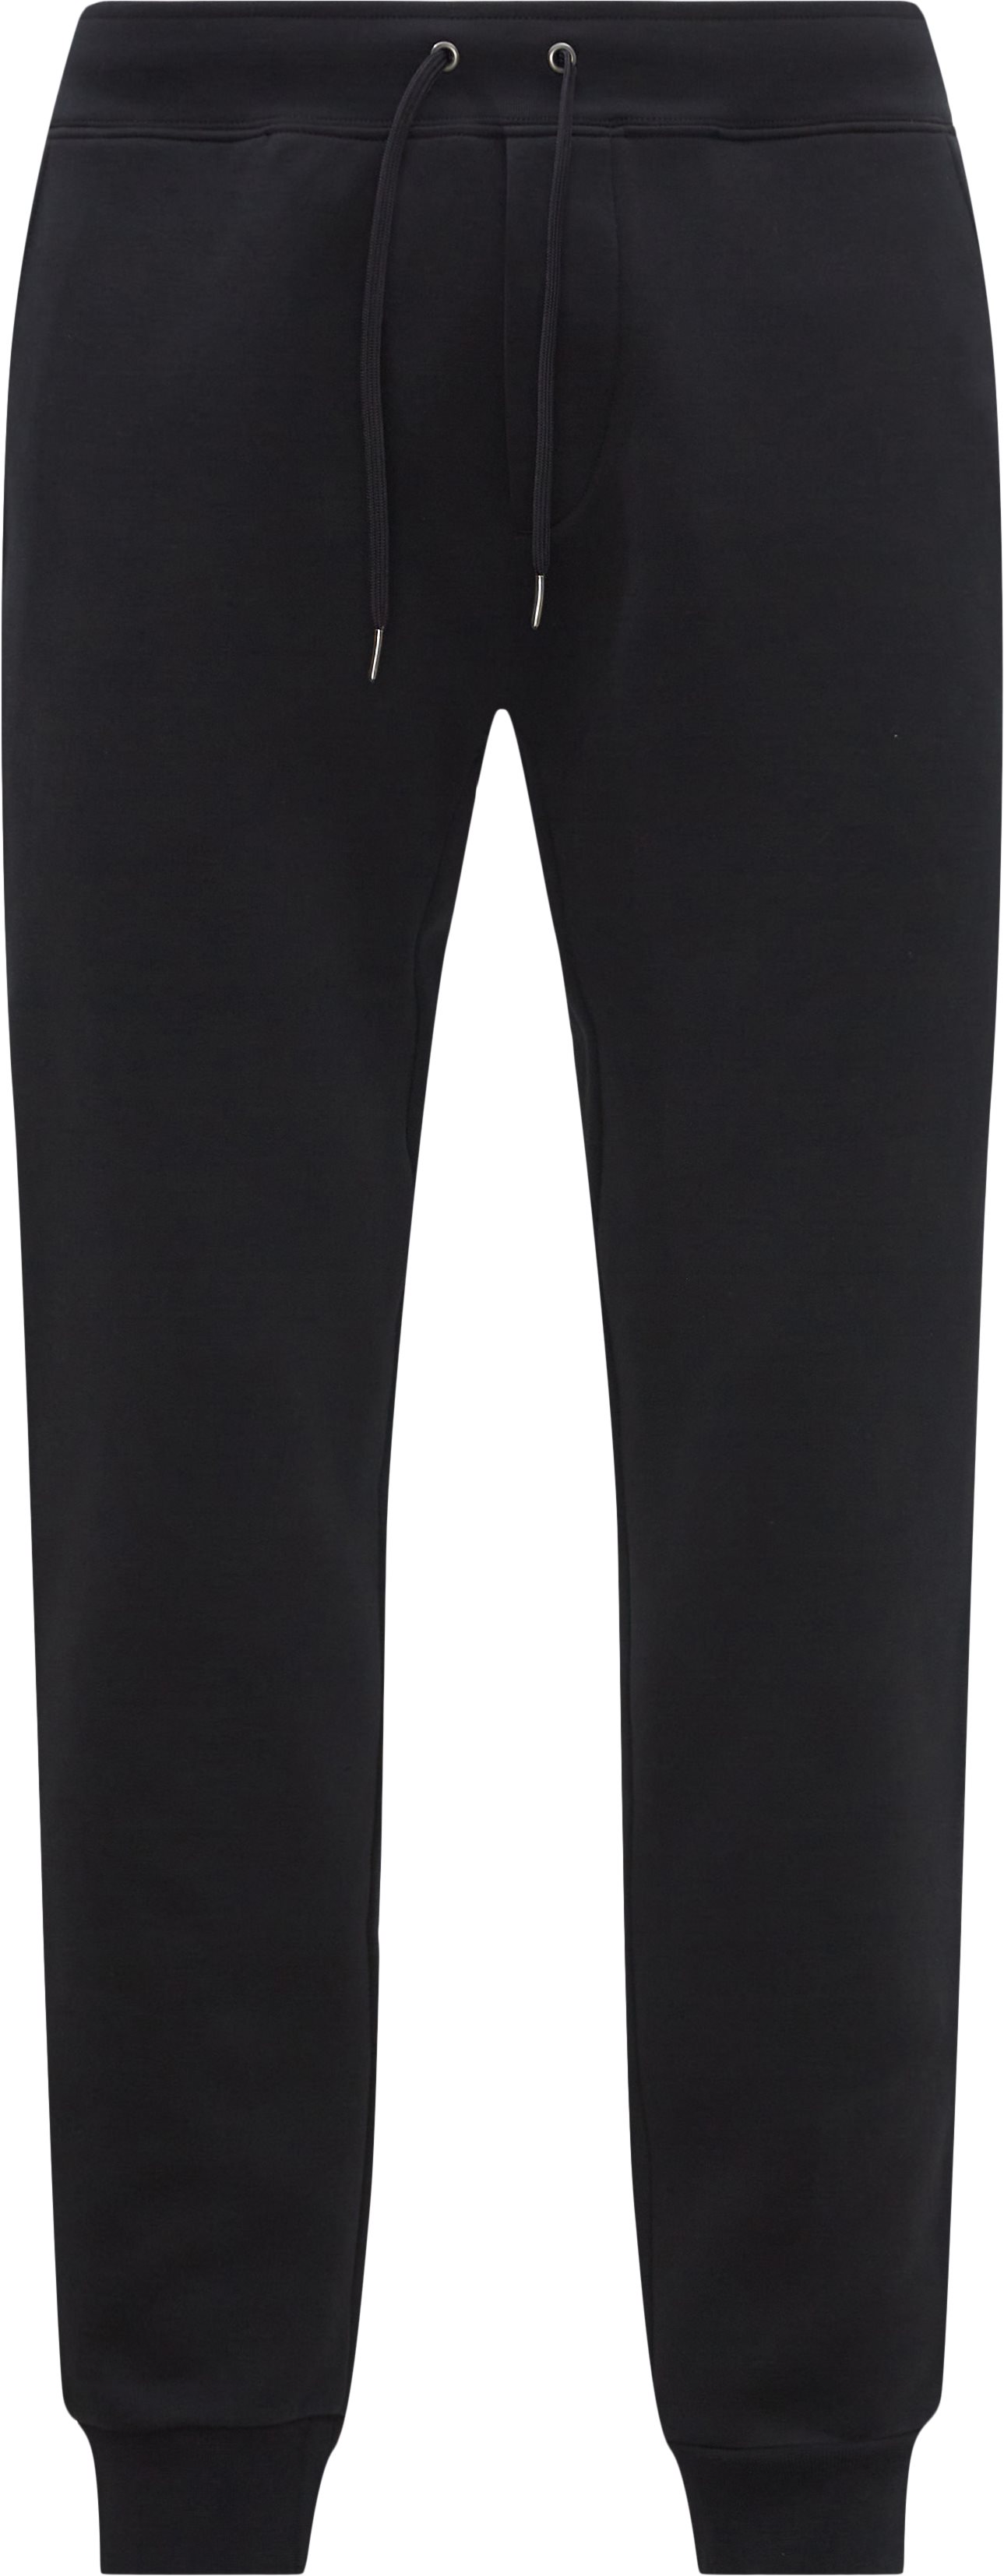 710888283 FW22 Trousers SORT from Polo Ralph Lauren 107 EUR